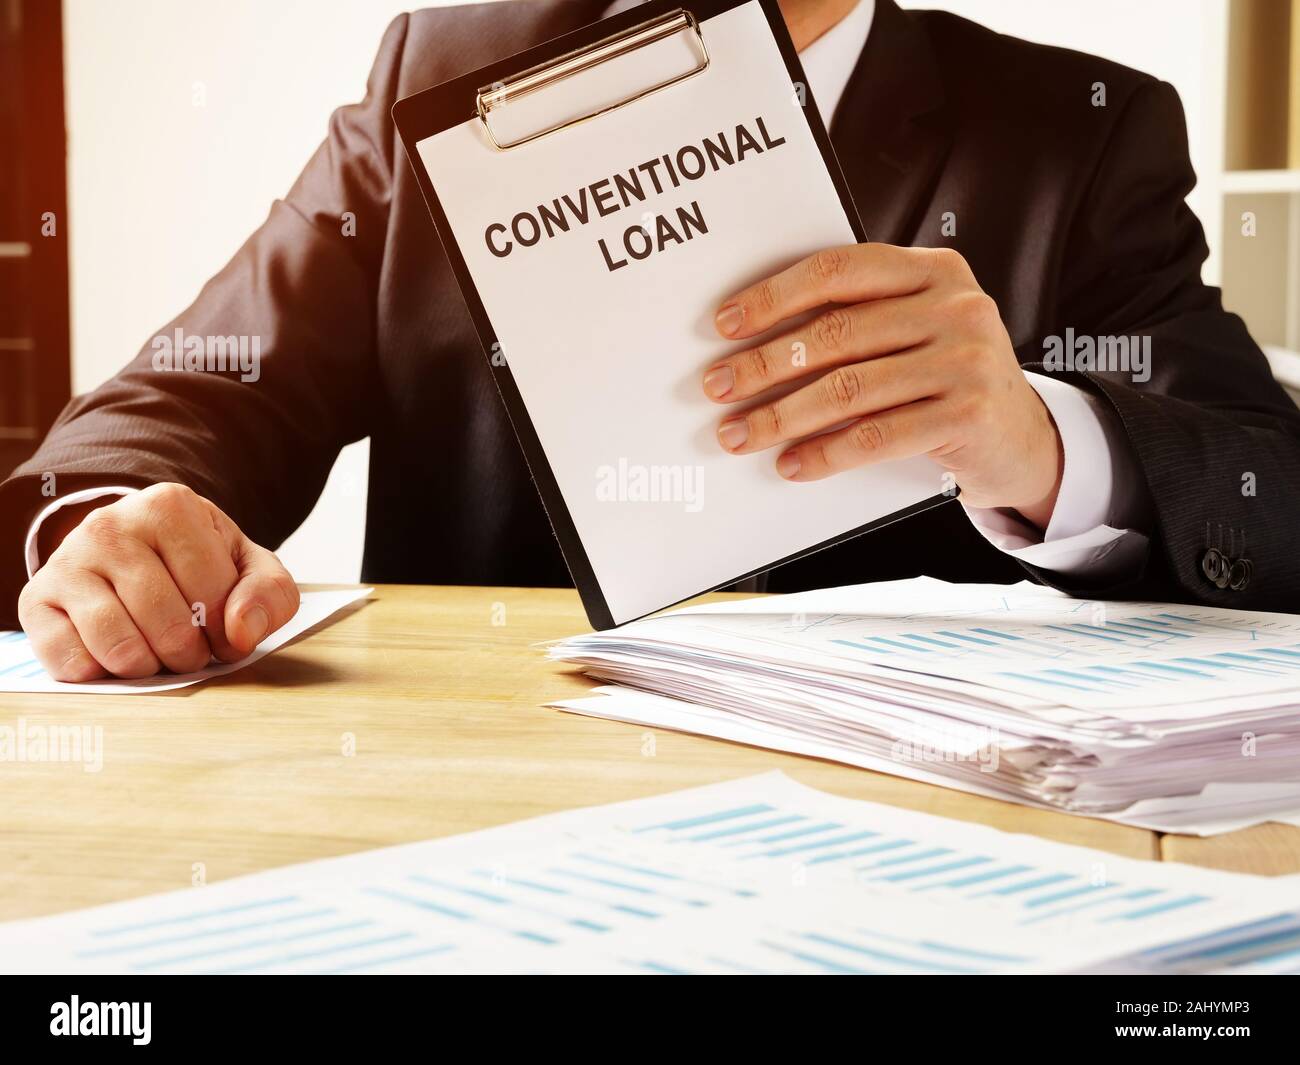 Manager holds Conventional loan agreement form. Stock Photo